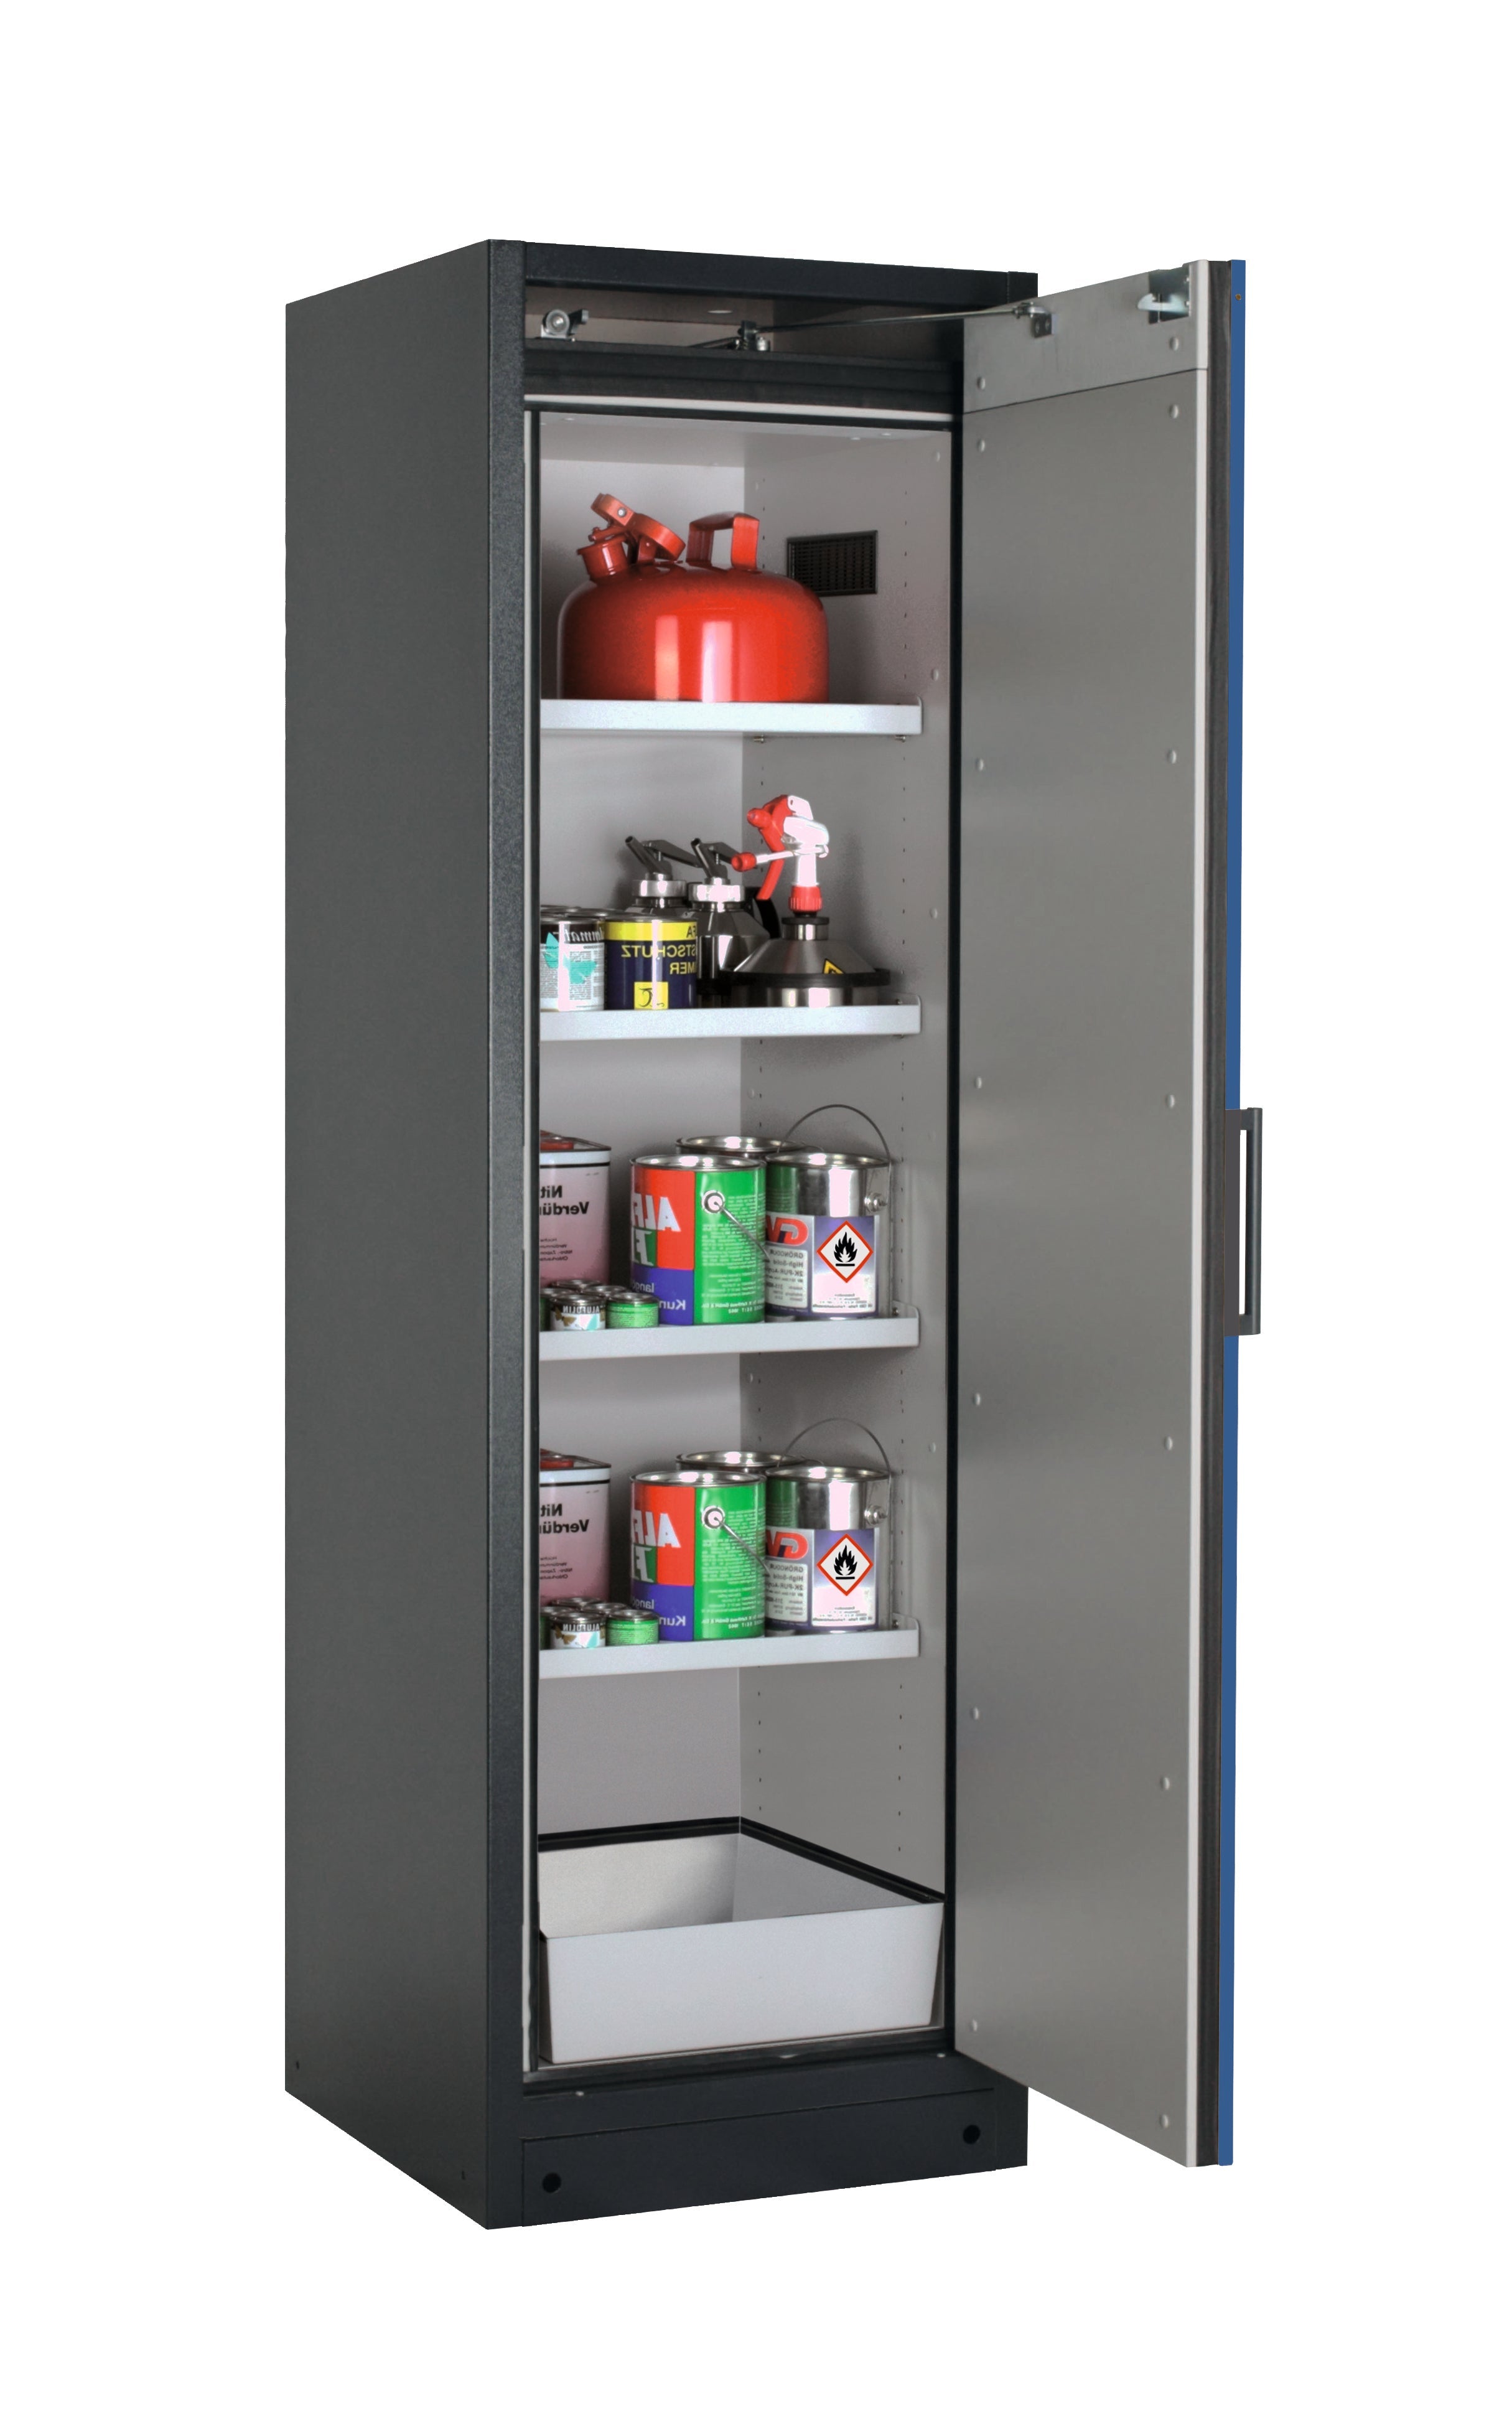 Type 90 safety storage cabinet Q-CLASSIC-90 model Q90.195.060.R in gentian blue RAL 5010 with 4x shelf standard (sheet steel),